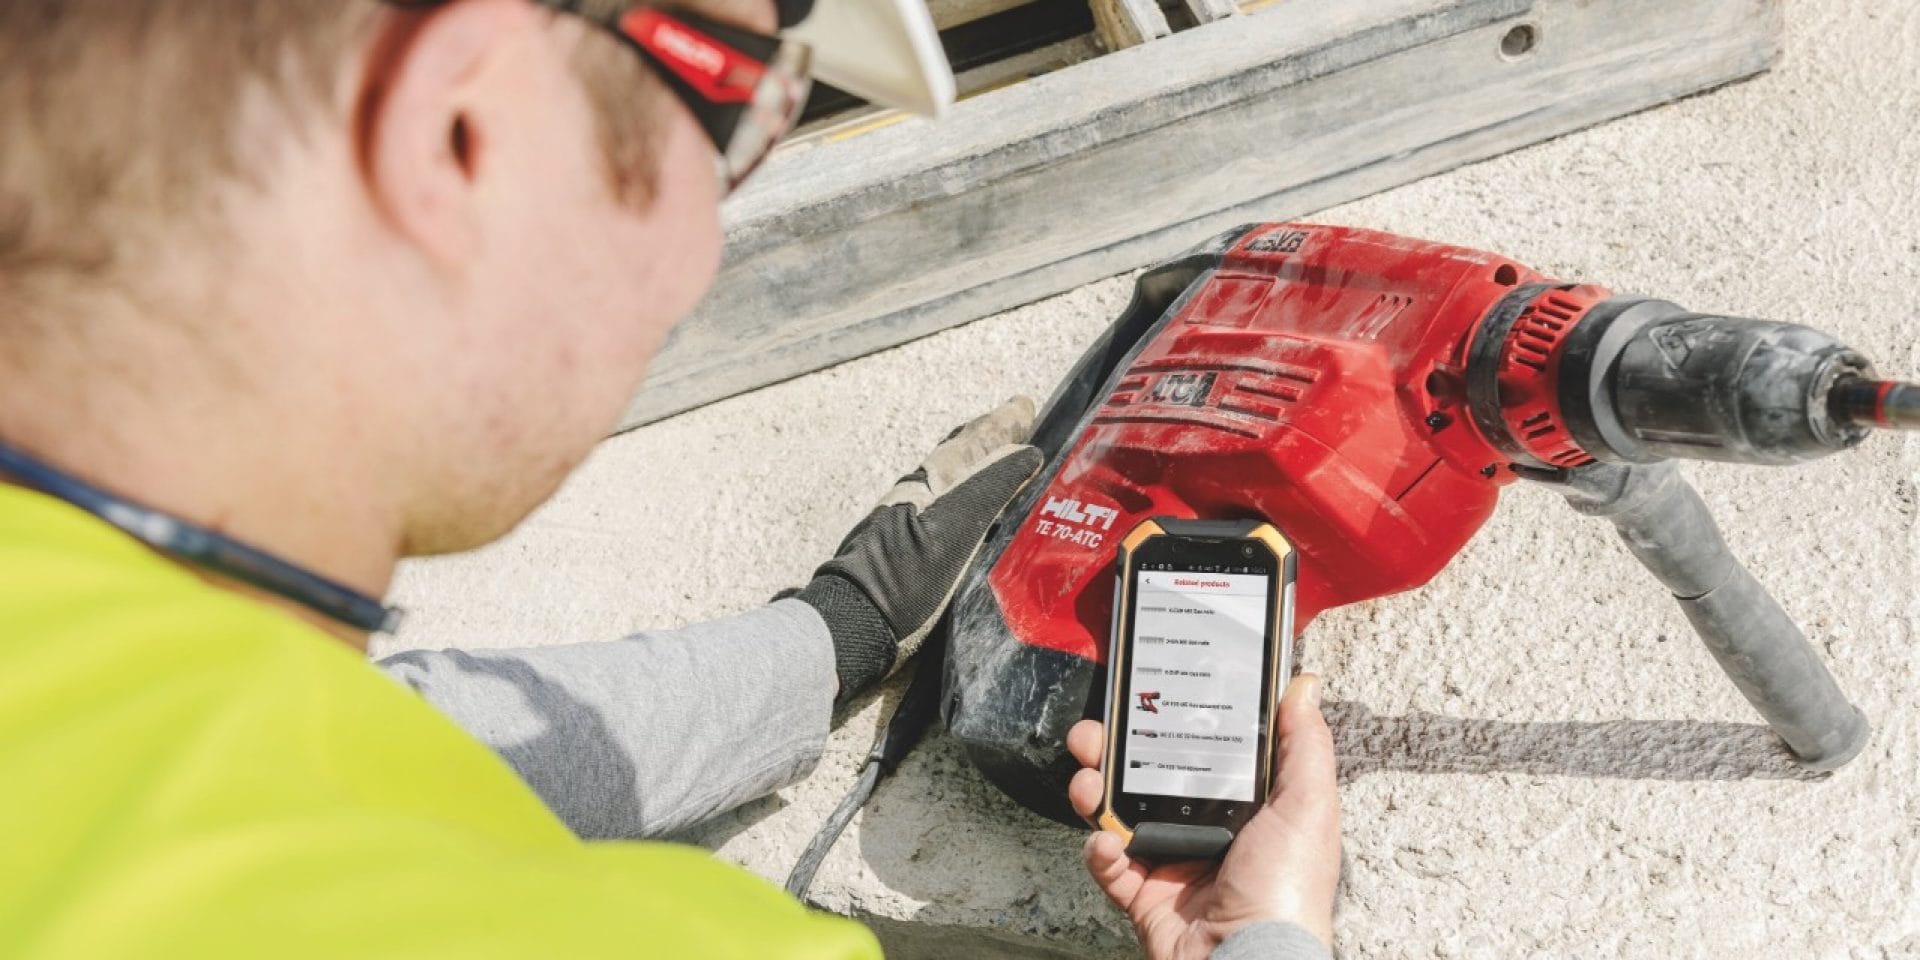 Schedule a service and view tool information with Hilti Connect